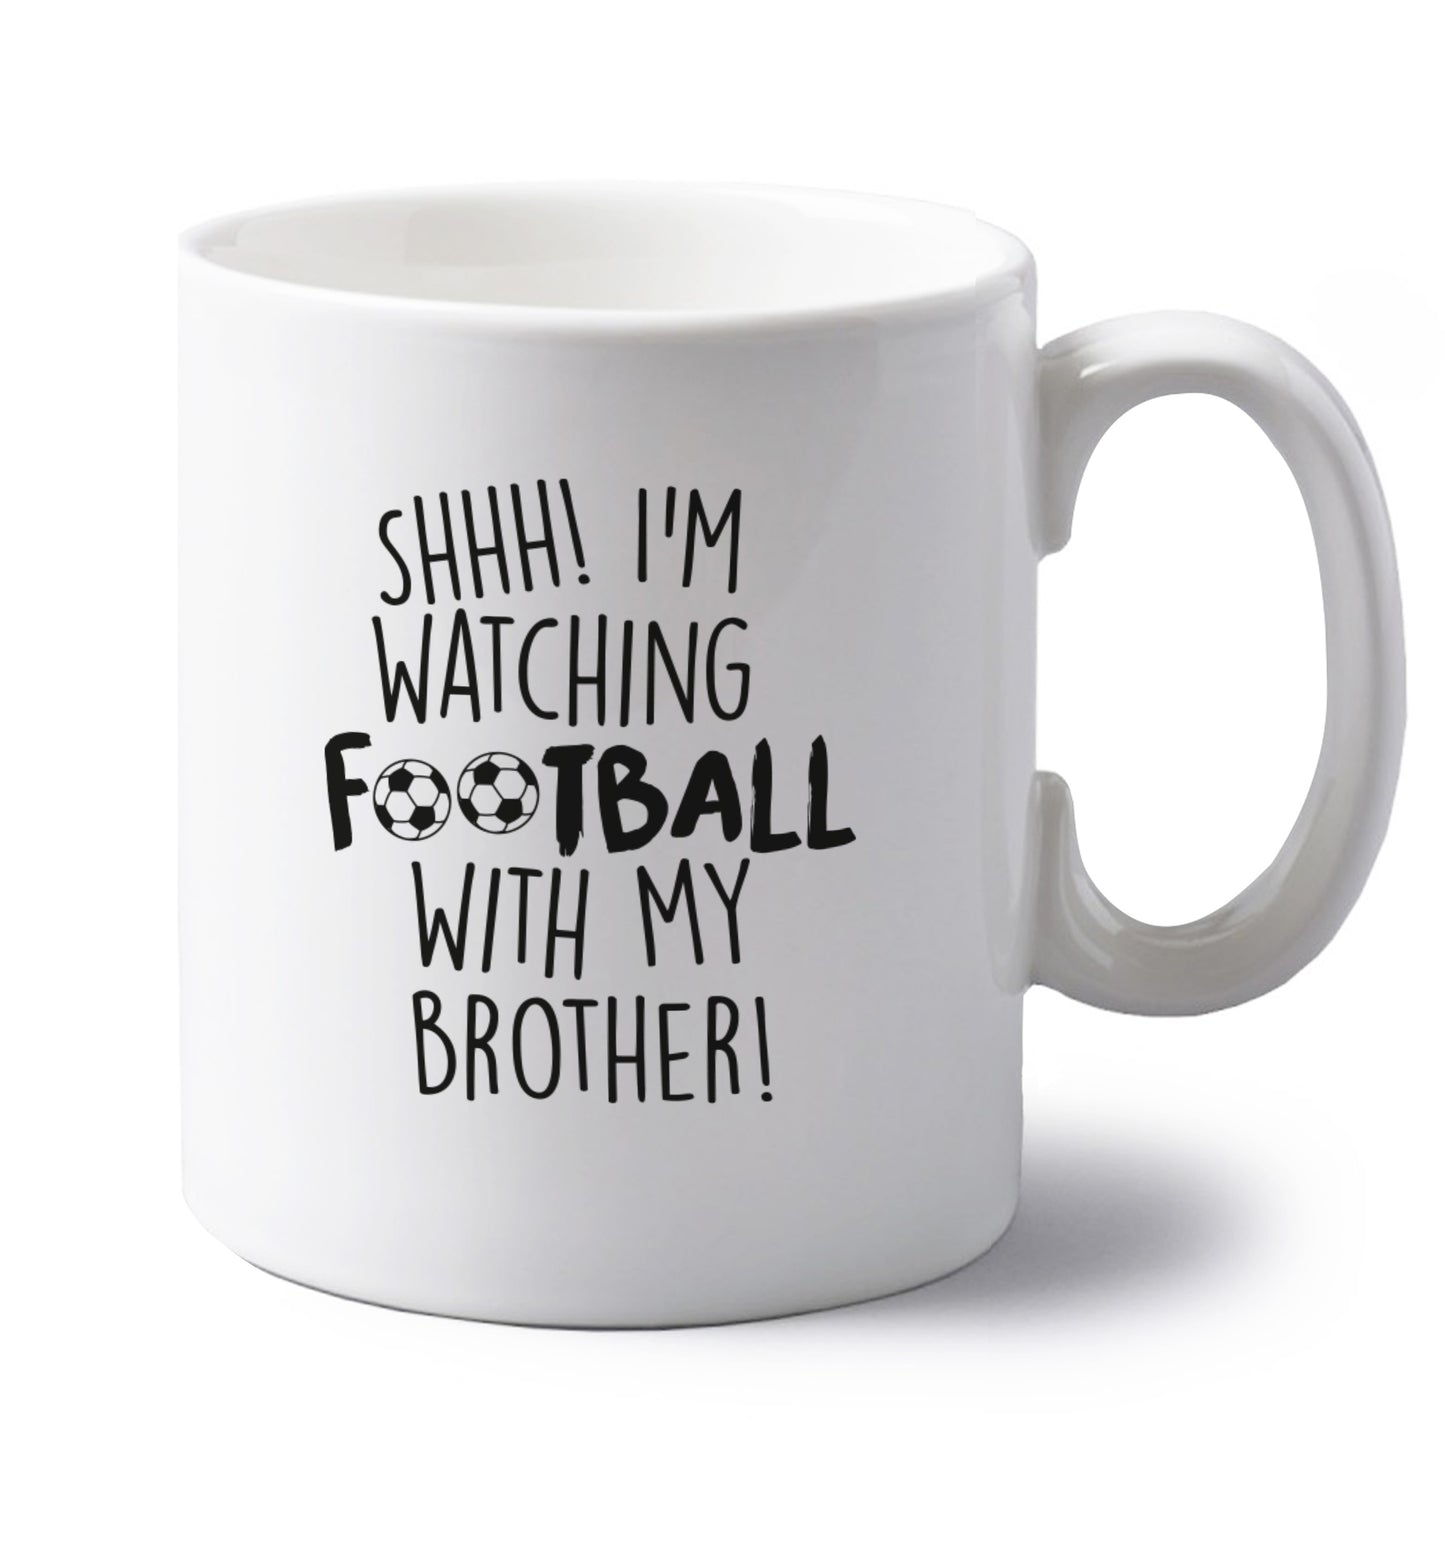 Shhh I'm watching football with my brother left handed white ceramic mug 